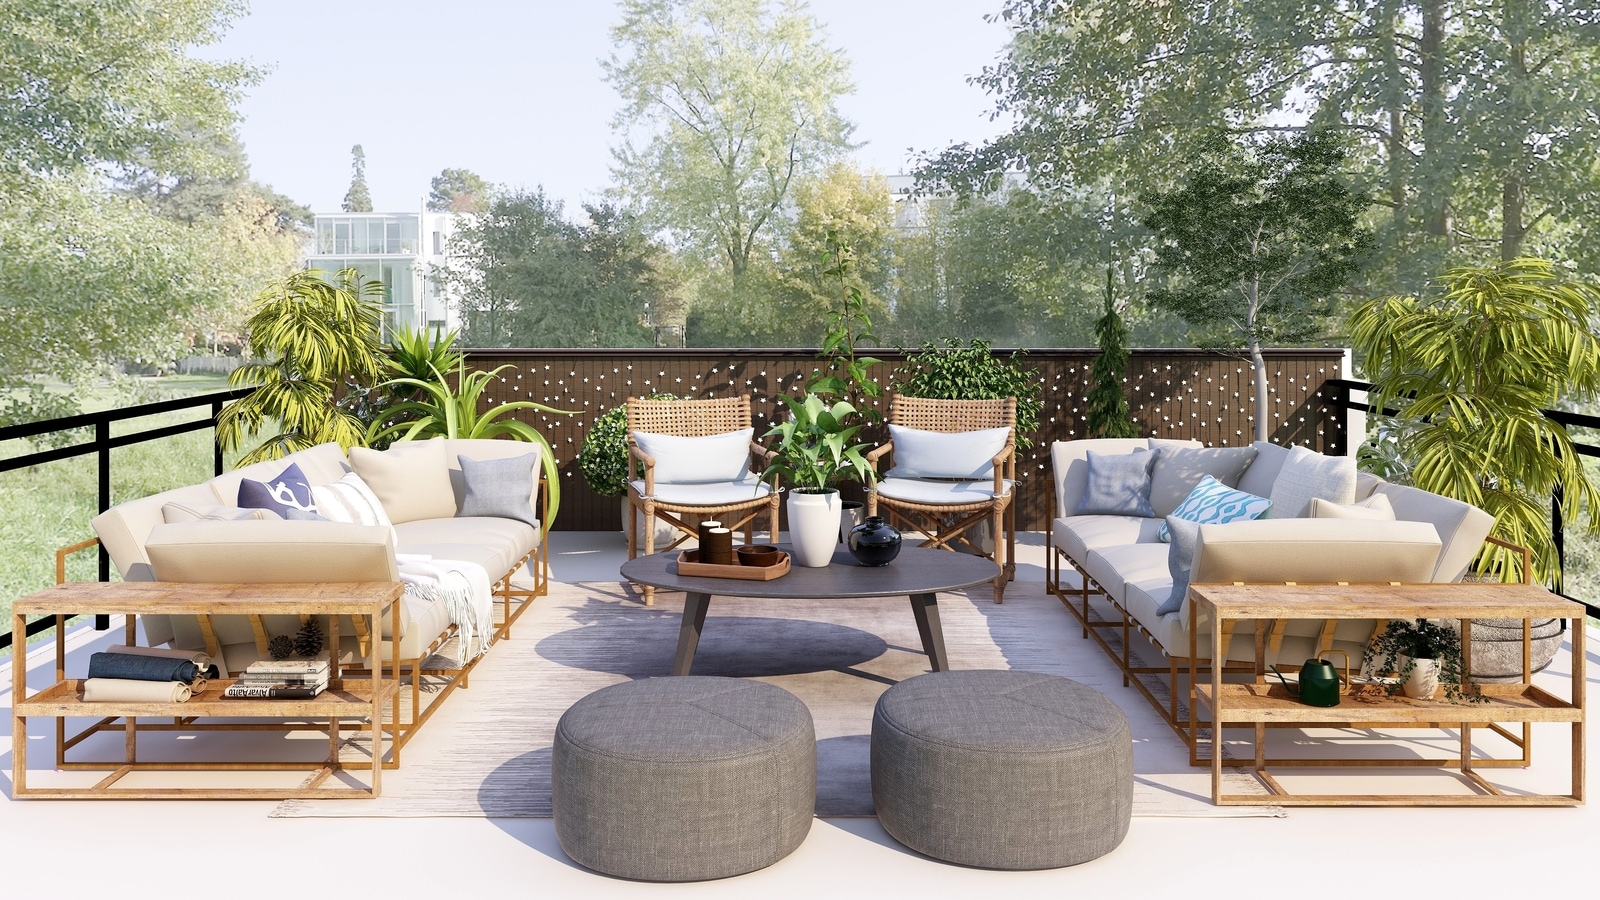 Home interior decor tips: Here’s how to design a rooftop terrace